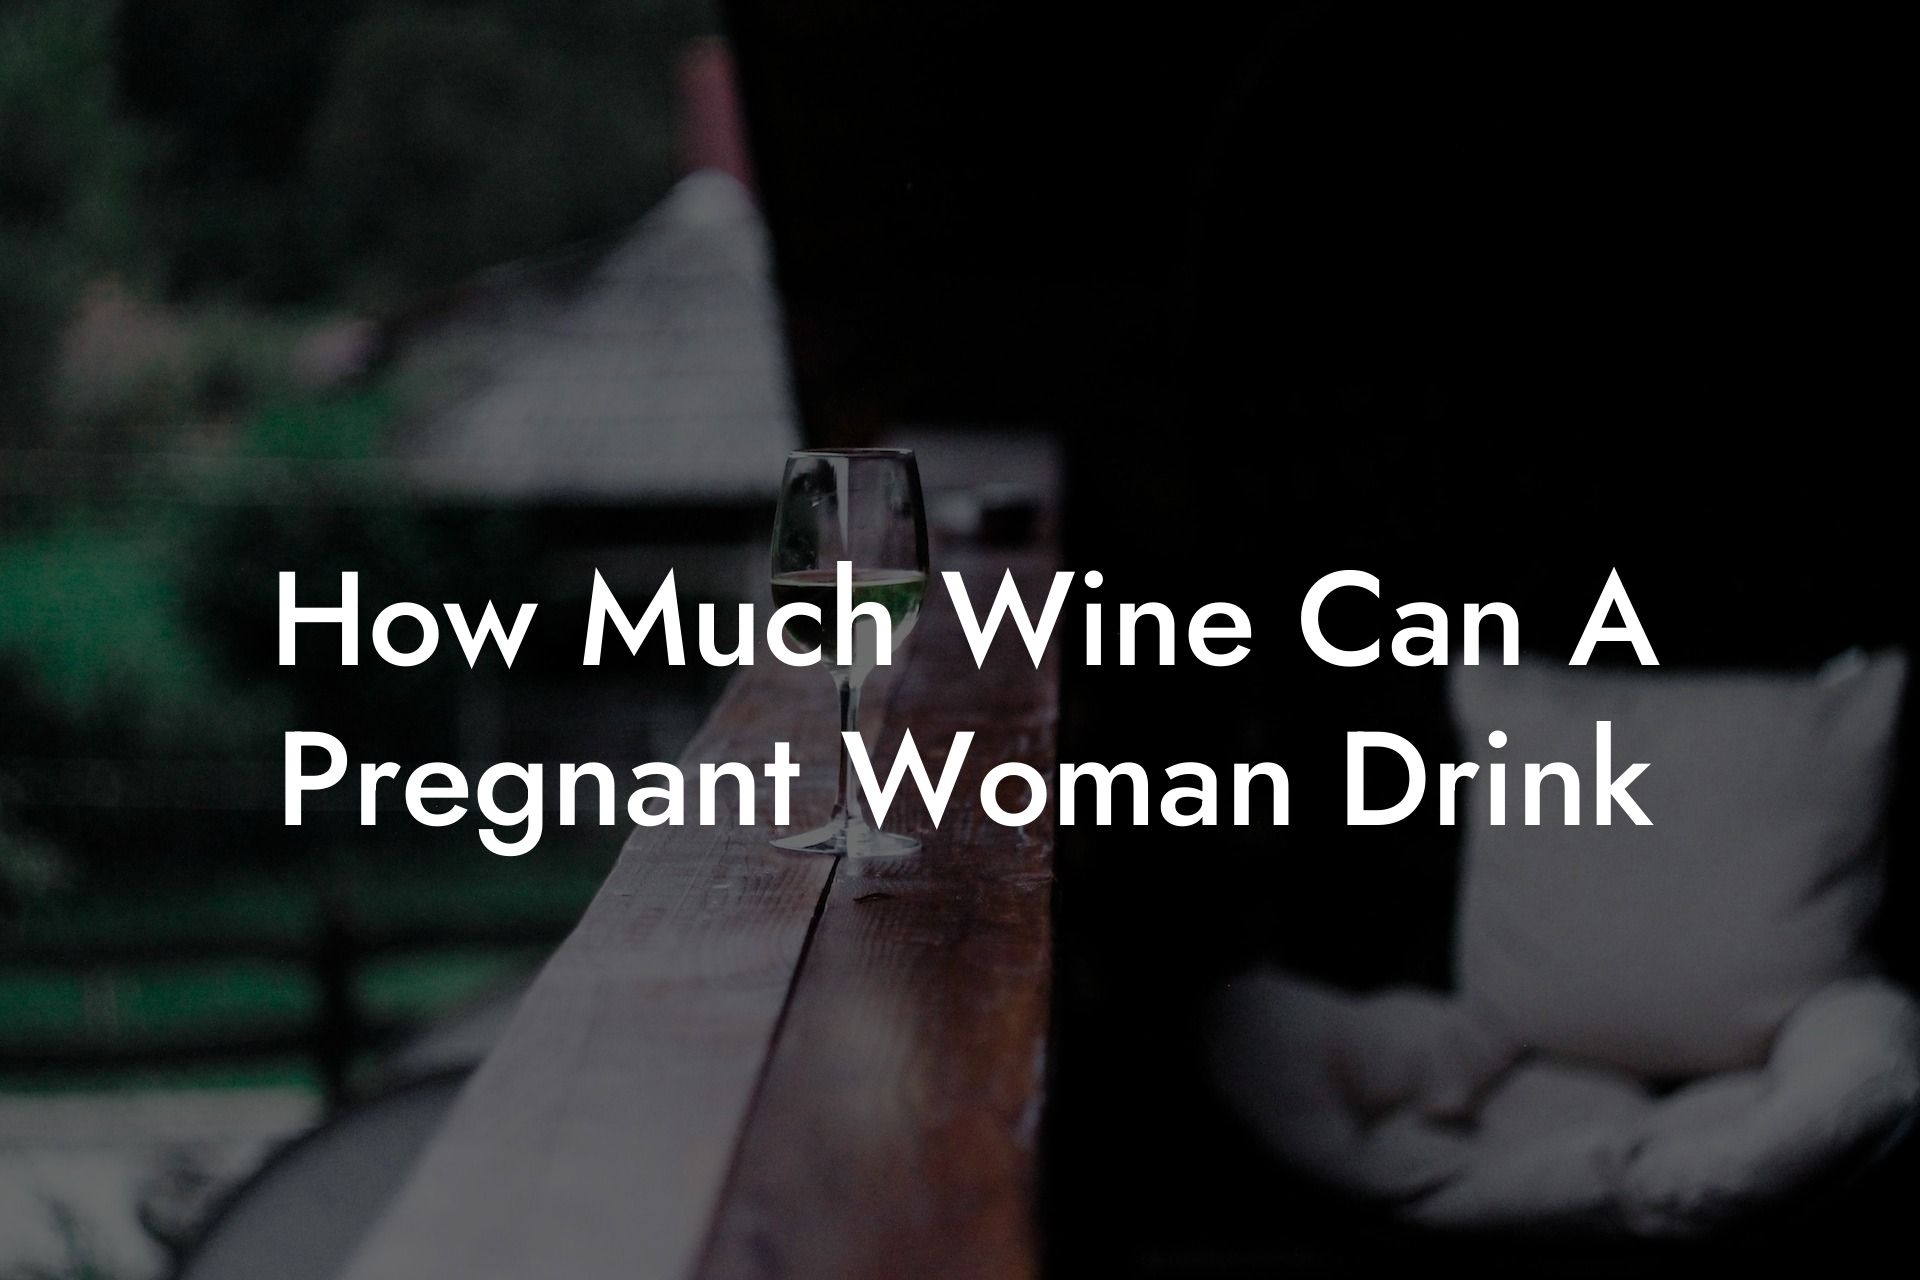 How Much Wine Can A Pregnant Woman Drink